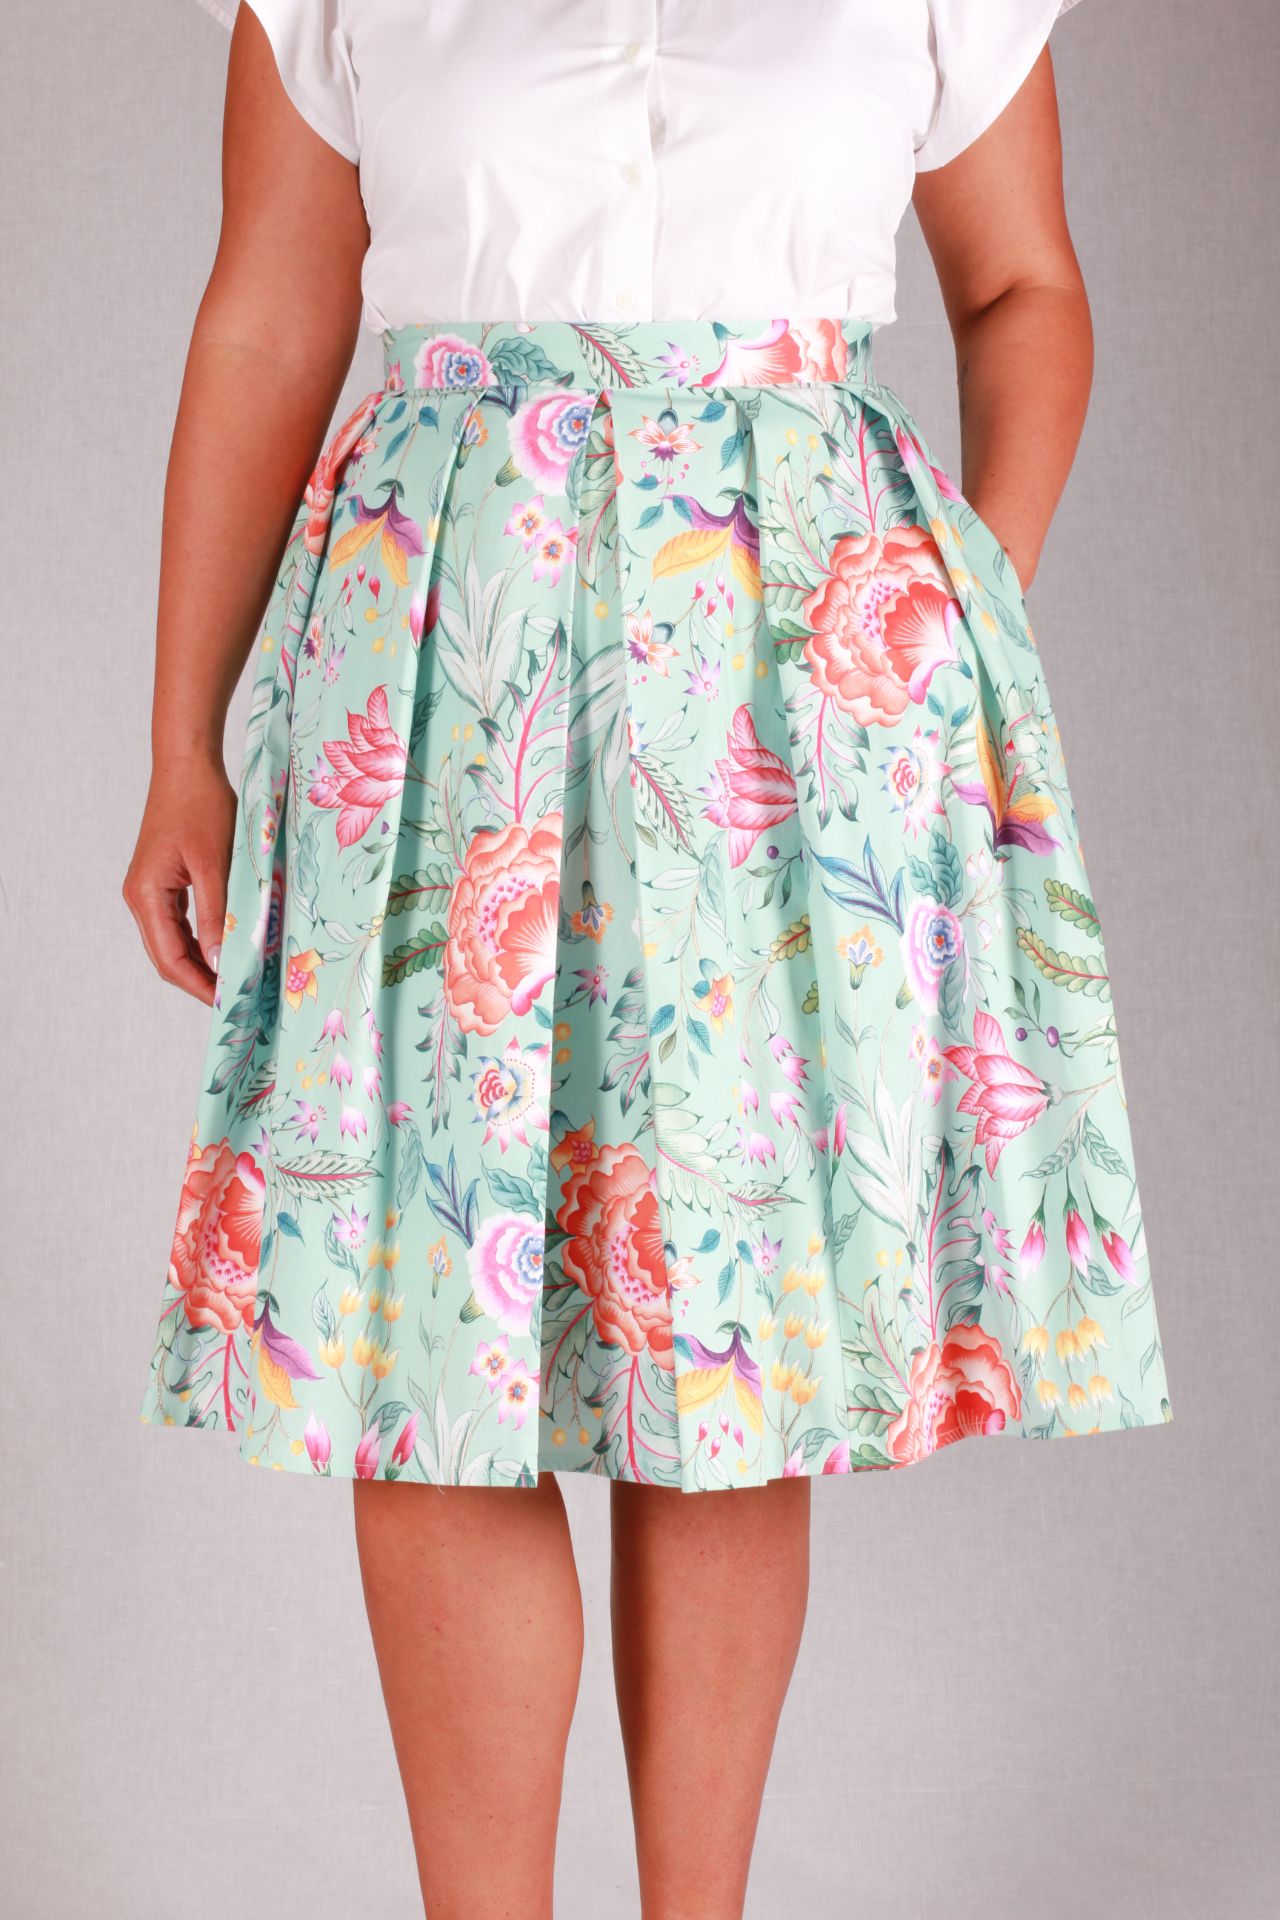 Lady Pamela Skirt - Andrea Lucy Designs - Sizes 12 to 24